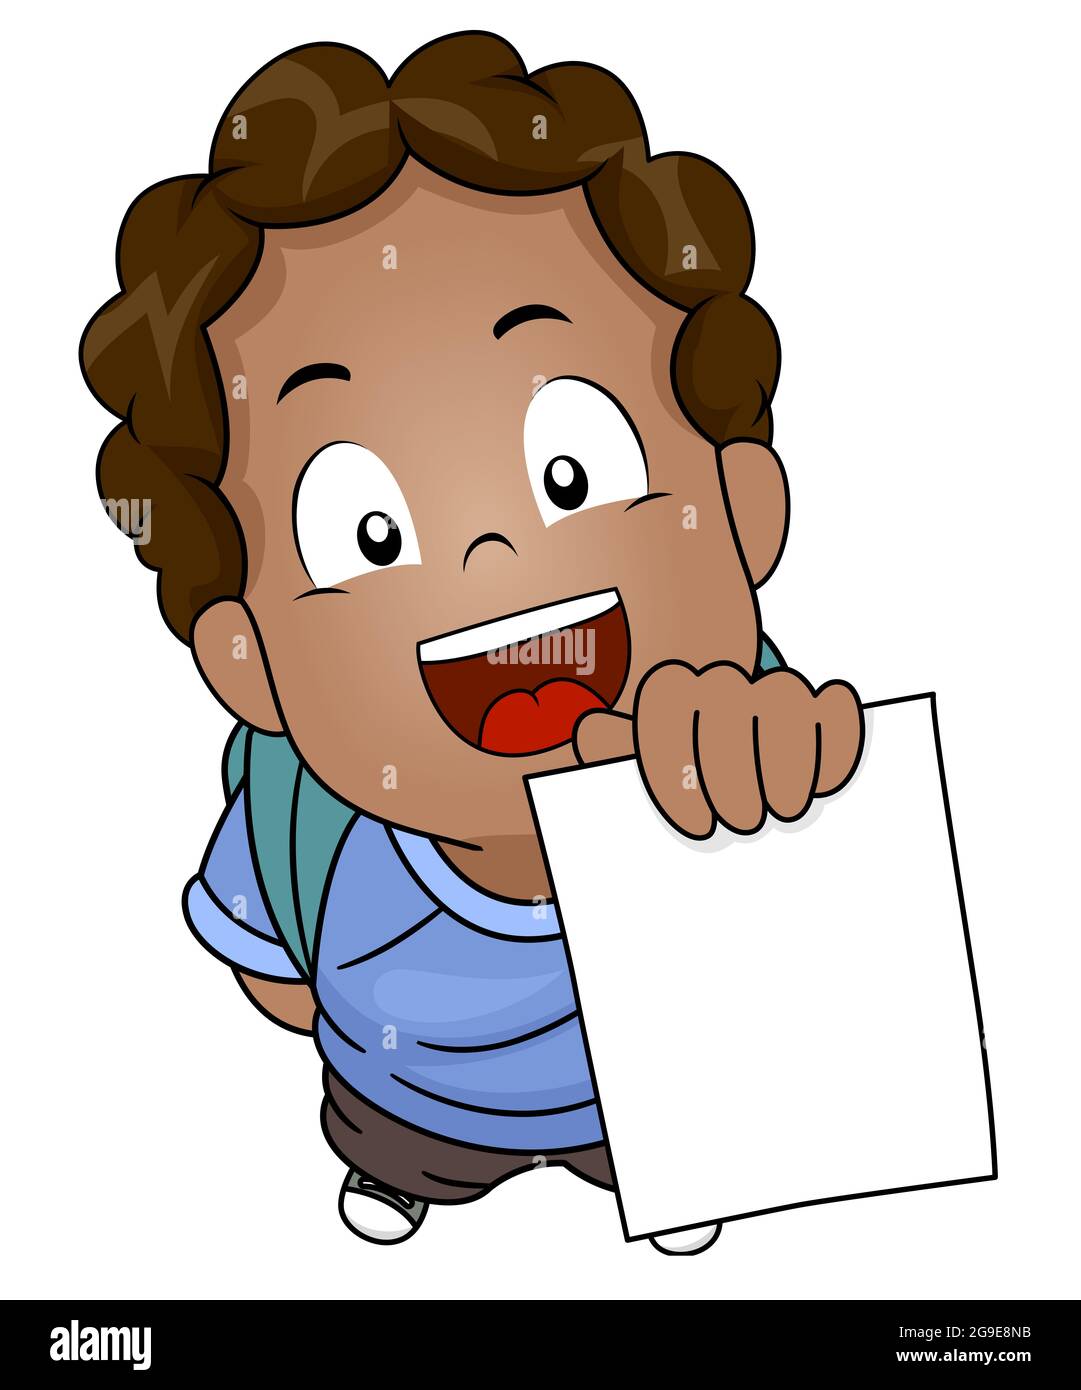 Illustration of a Kid Boy Student Showing Blank Test Paper and Smiling  Stock Photo - Alamy